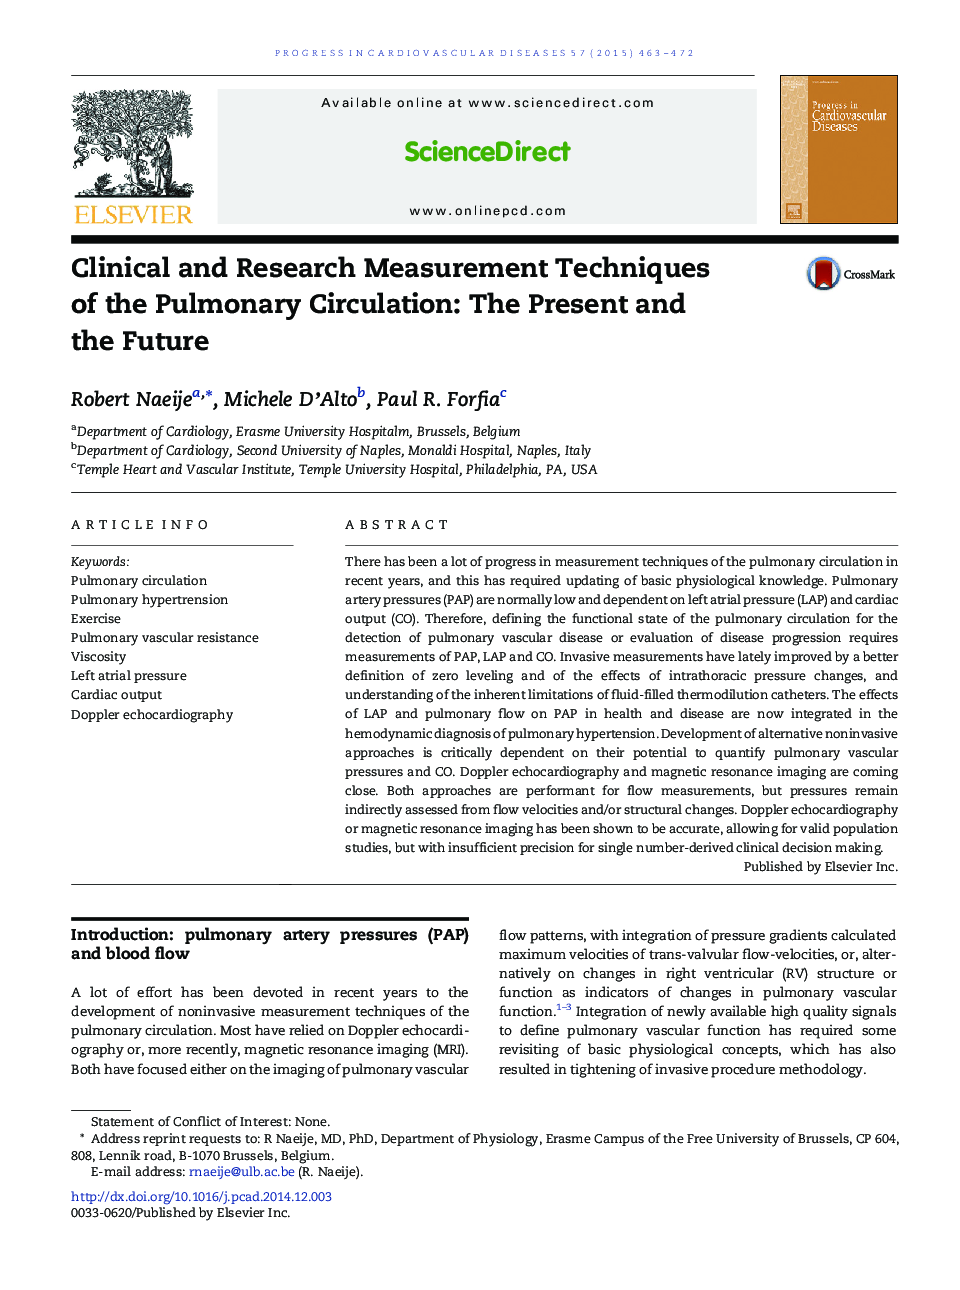 Clinical and Research Measurement Techniques of the Pulmonary Circulation: The Present and the Future 